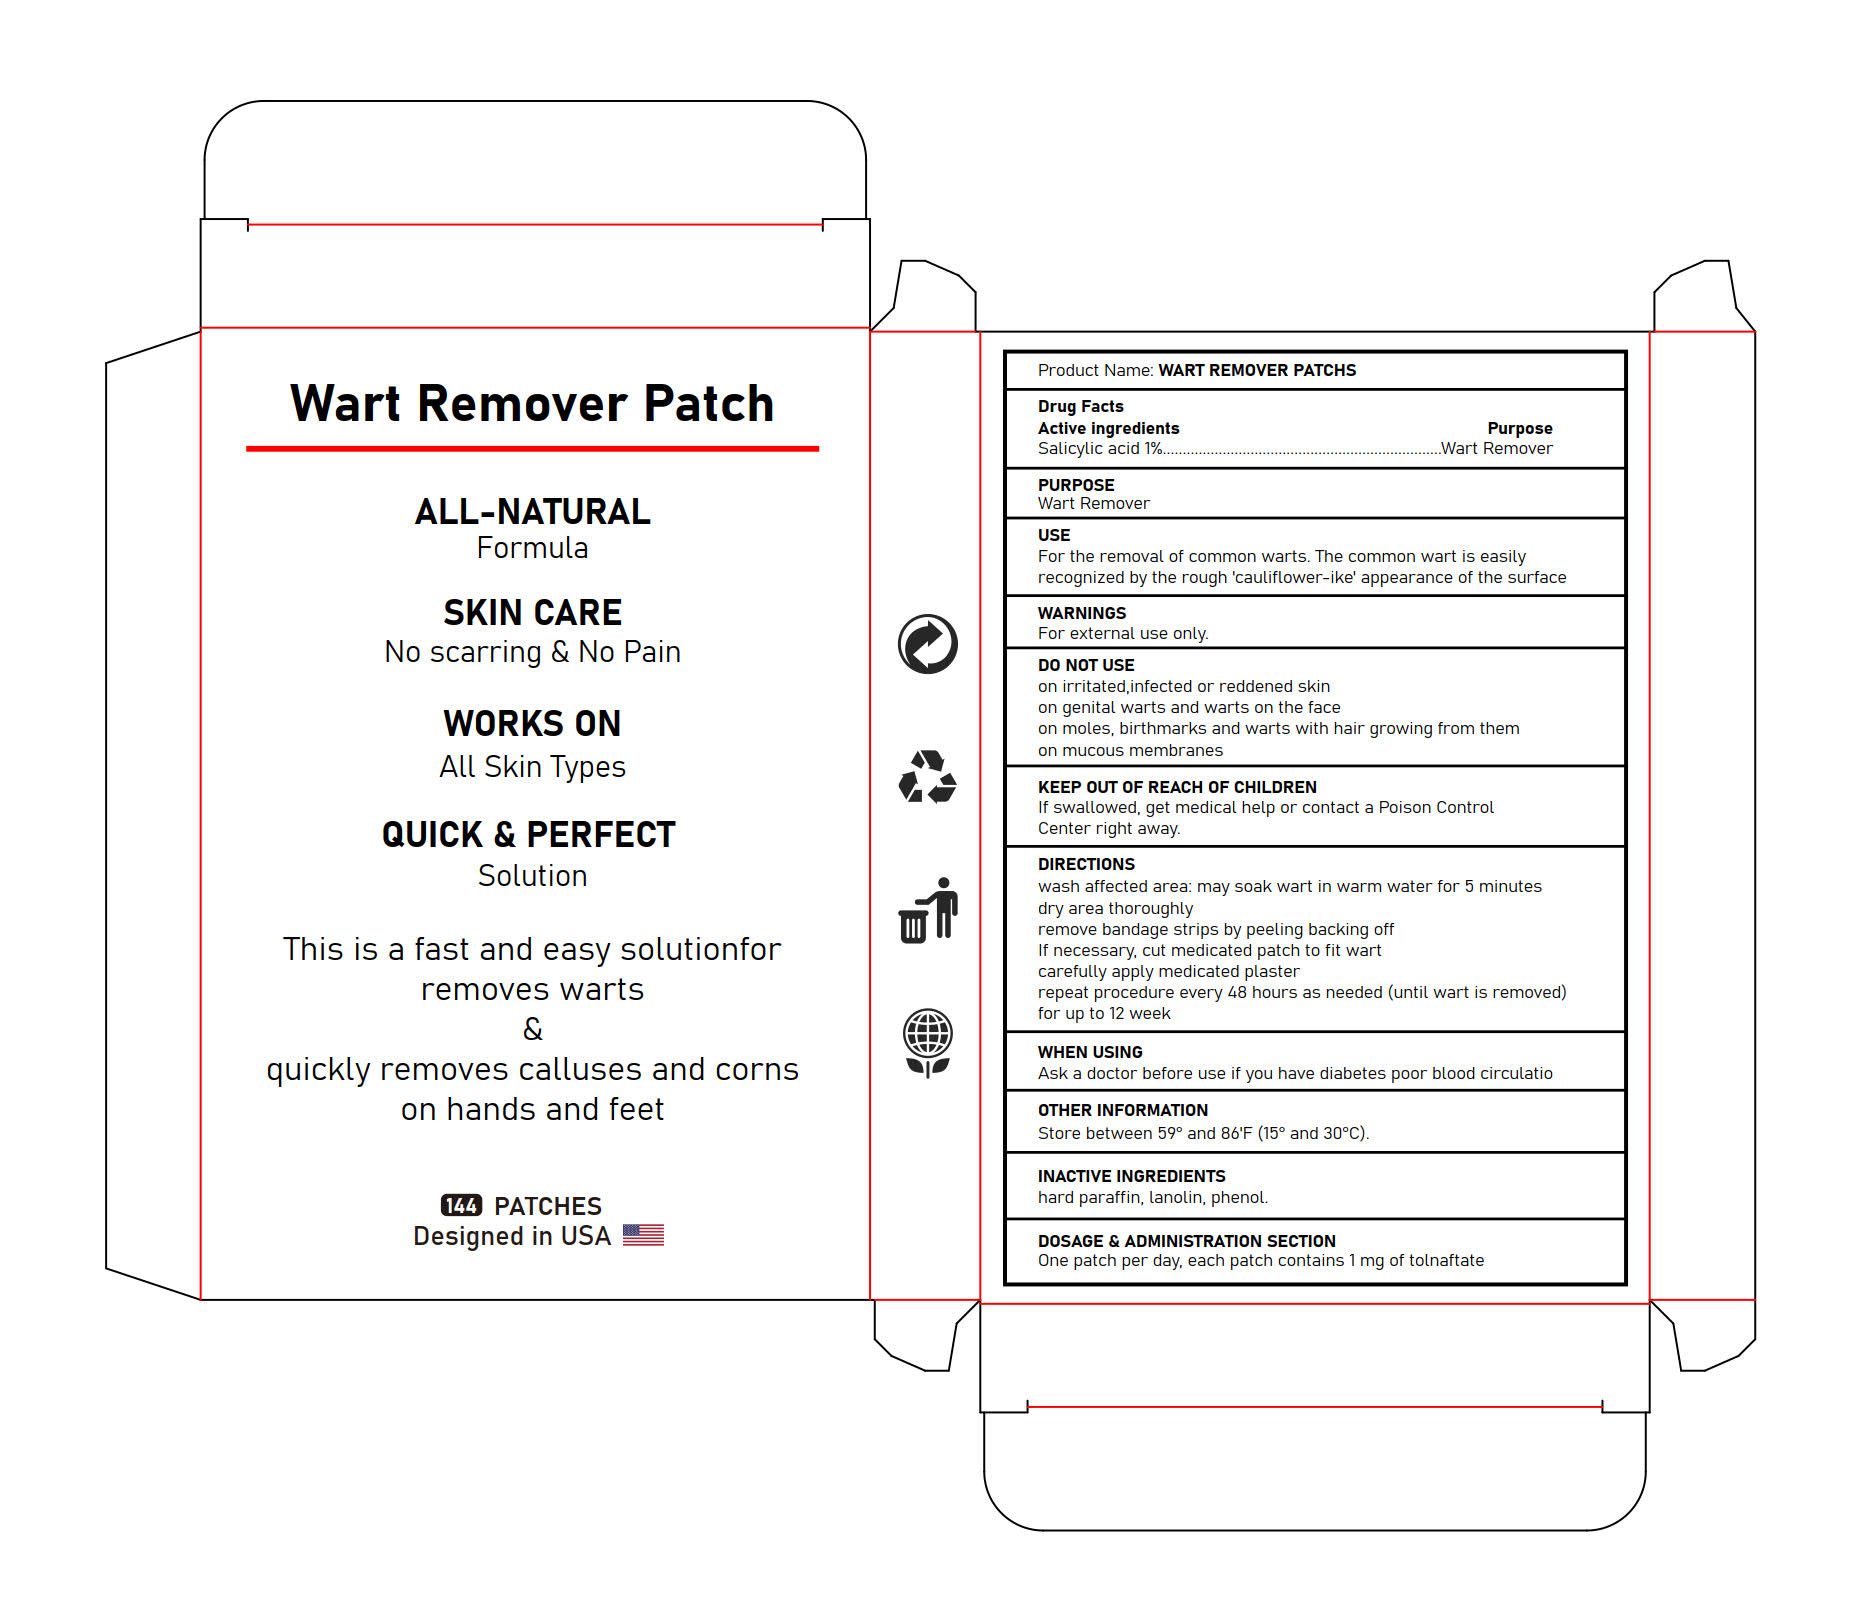 WART REMOVER PATCH